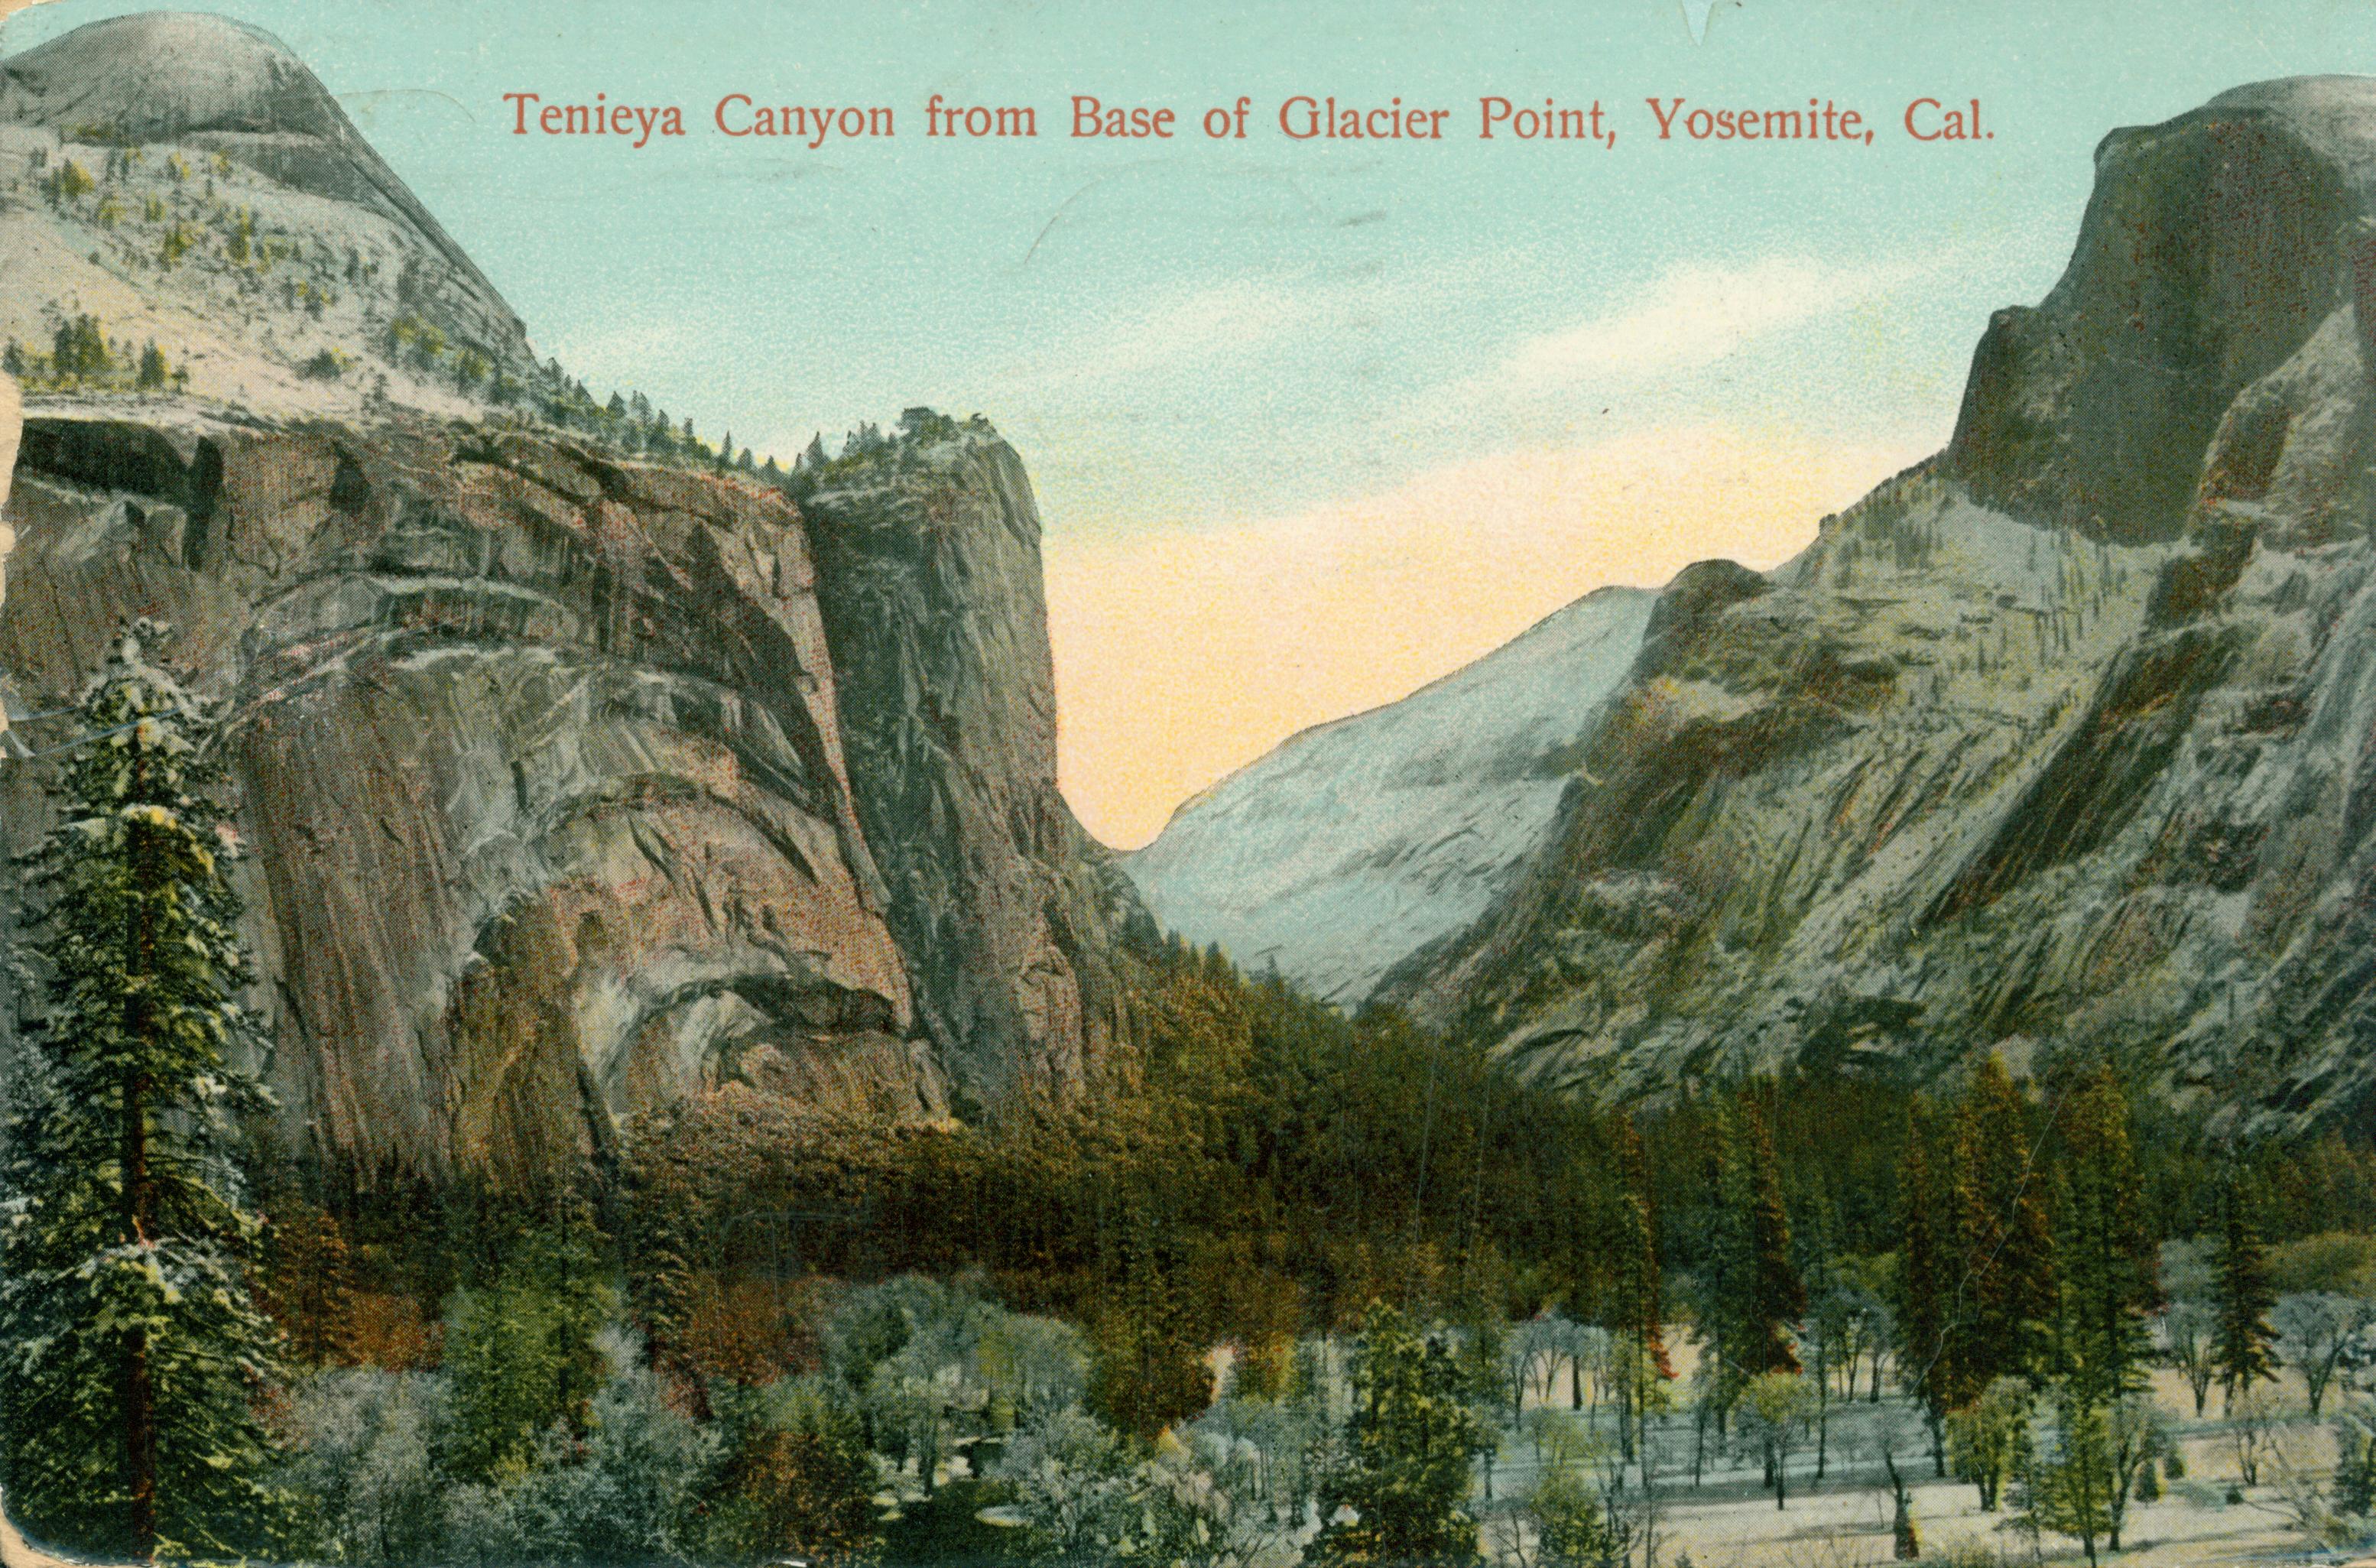 Shows a view of Tenaya Canyon with Half Dome in the upper right corner of the image